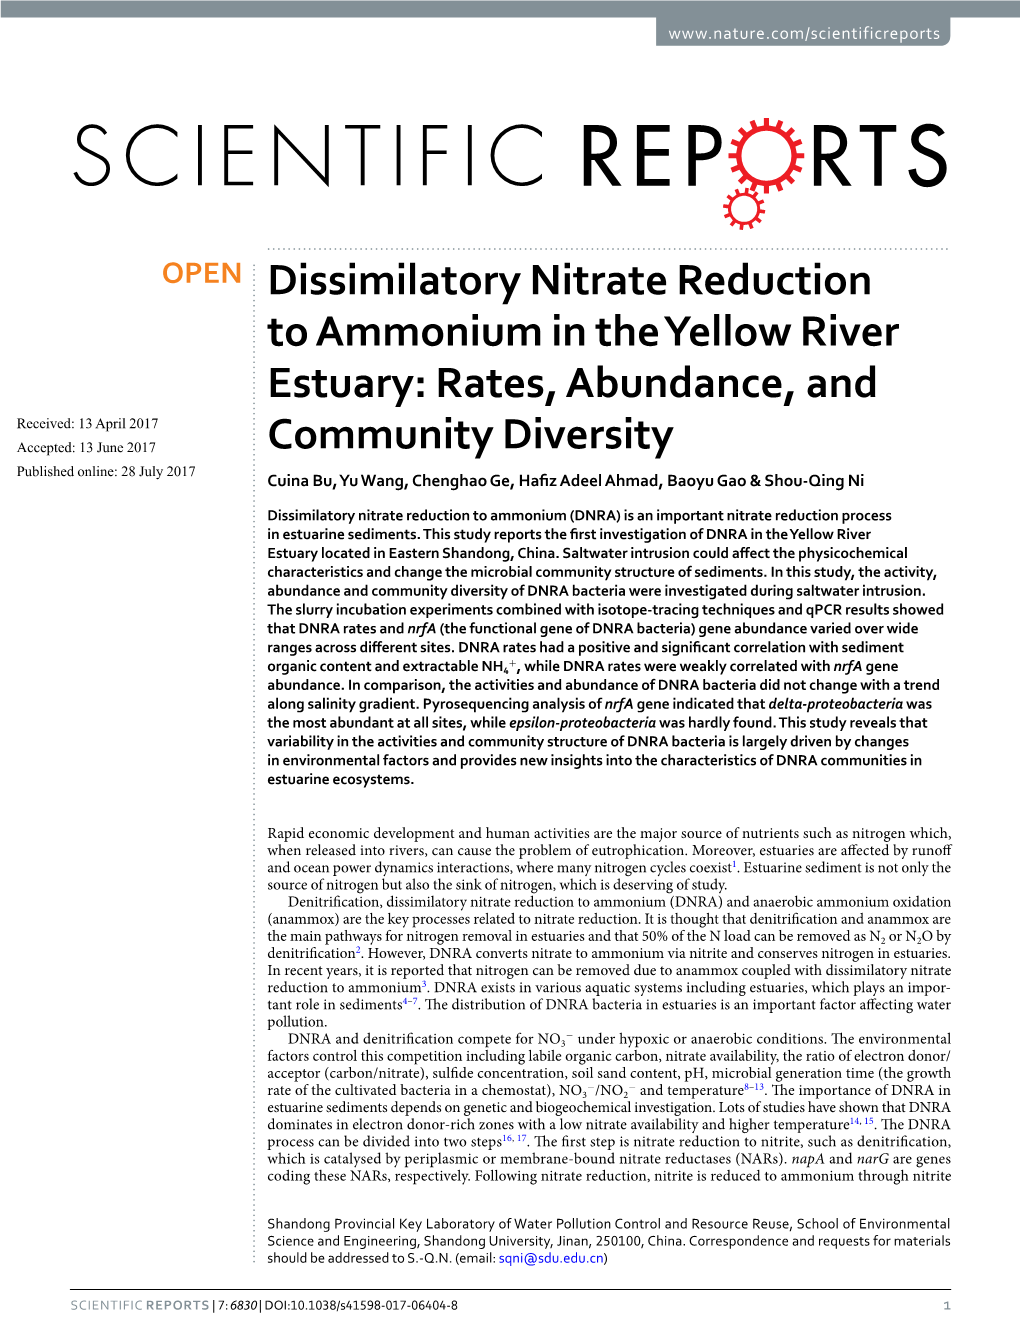 Dissimilatory Nitrate Reduction to Ammonium in the Yellow River